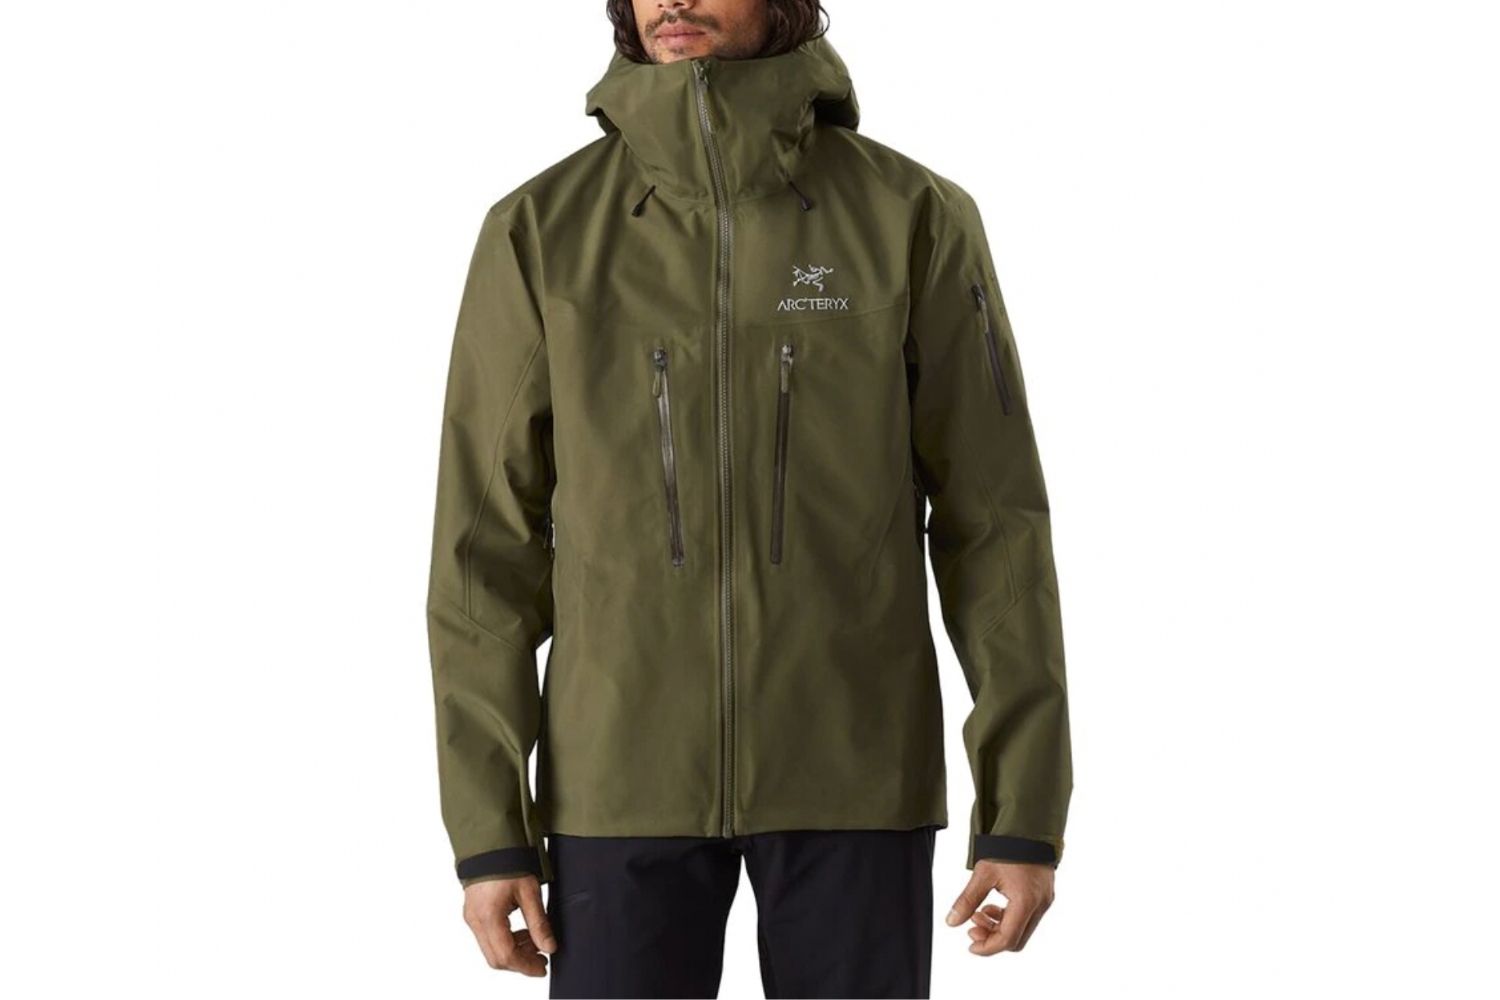 The Best Men's Lightweight Shell And Rain Jackets For Hiking - BroBible